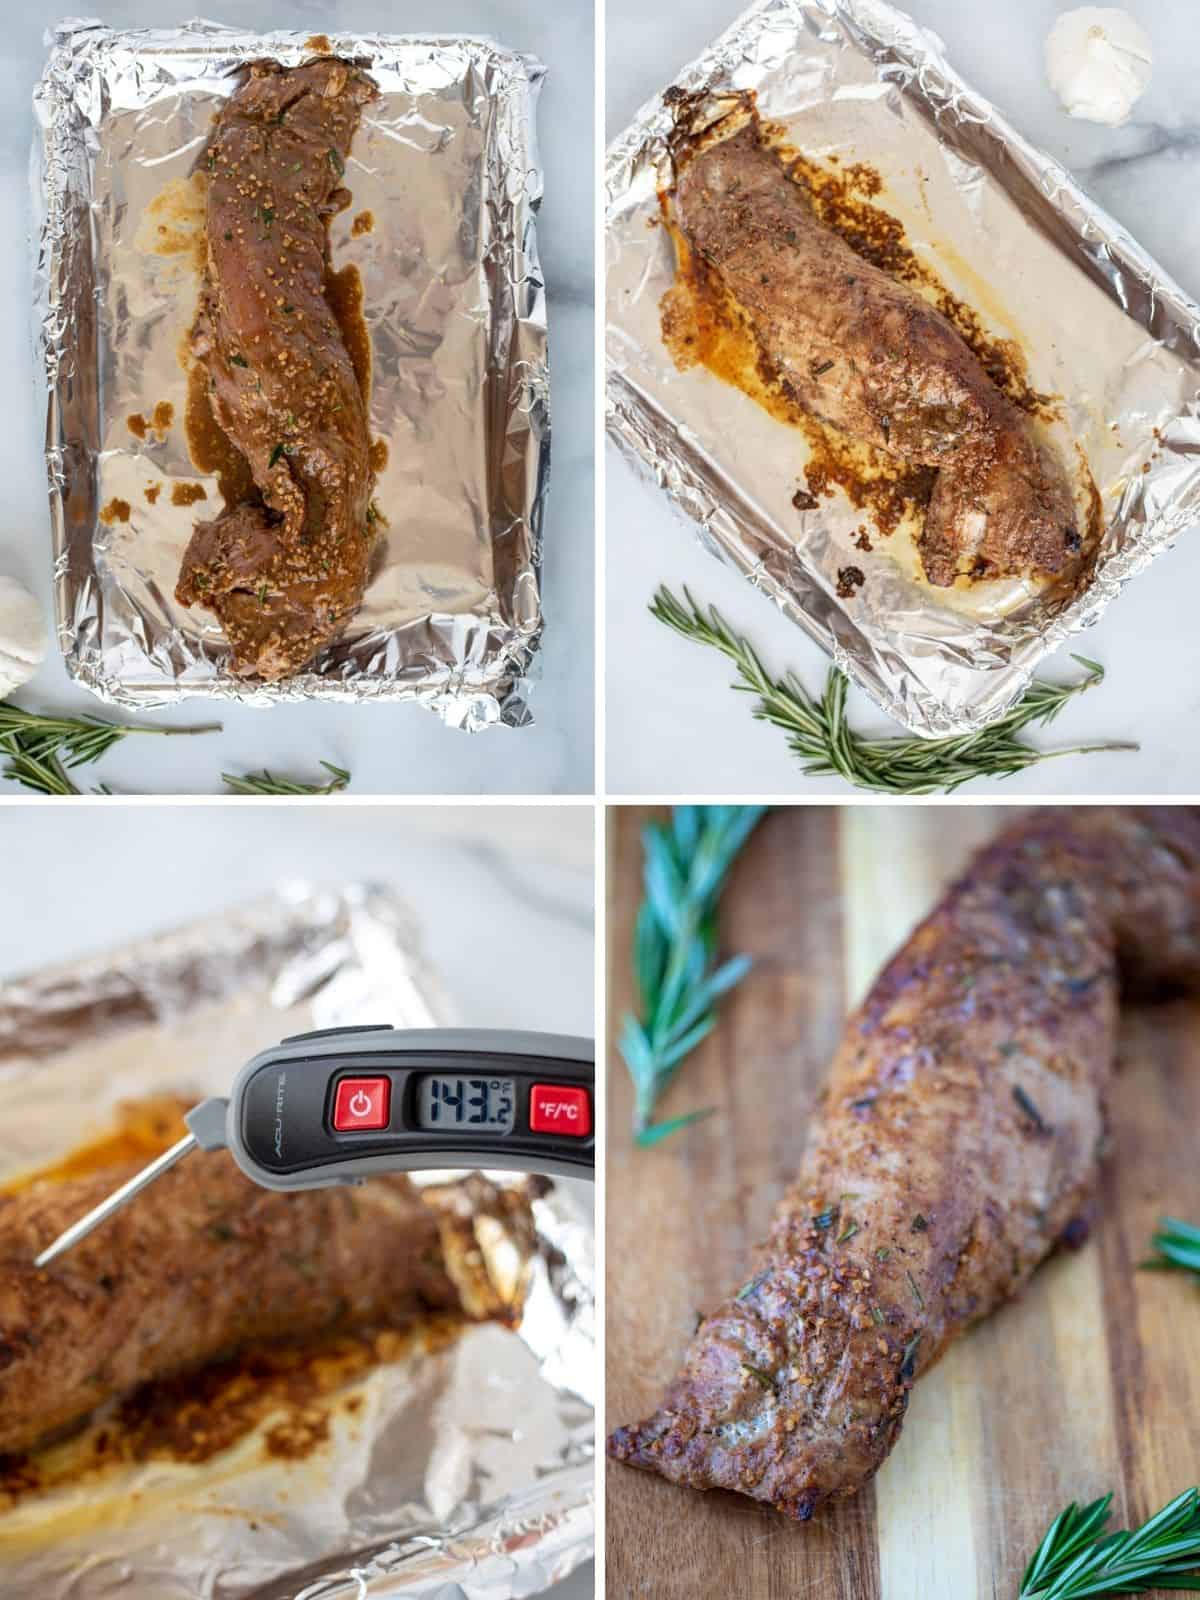 Collage of 4 pictures showing marinated pork tenderloin on baking sheet, baked, at internal temp of 141, and resting on cutting board.